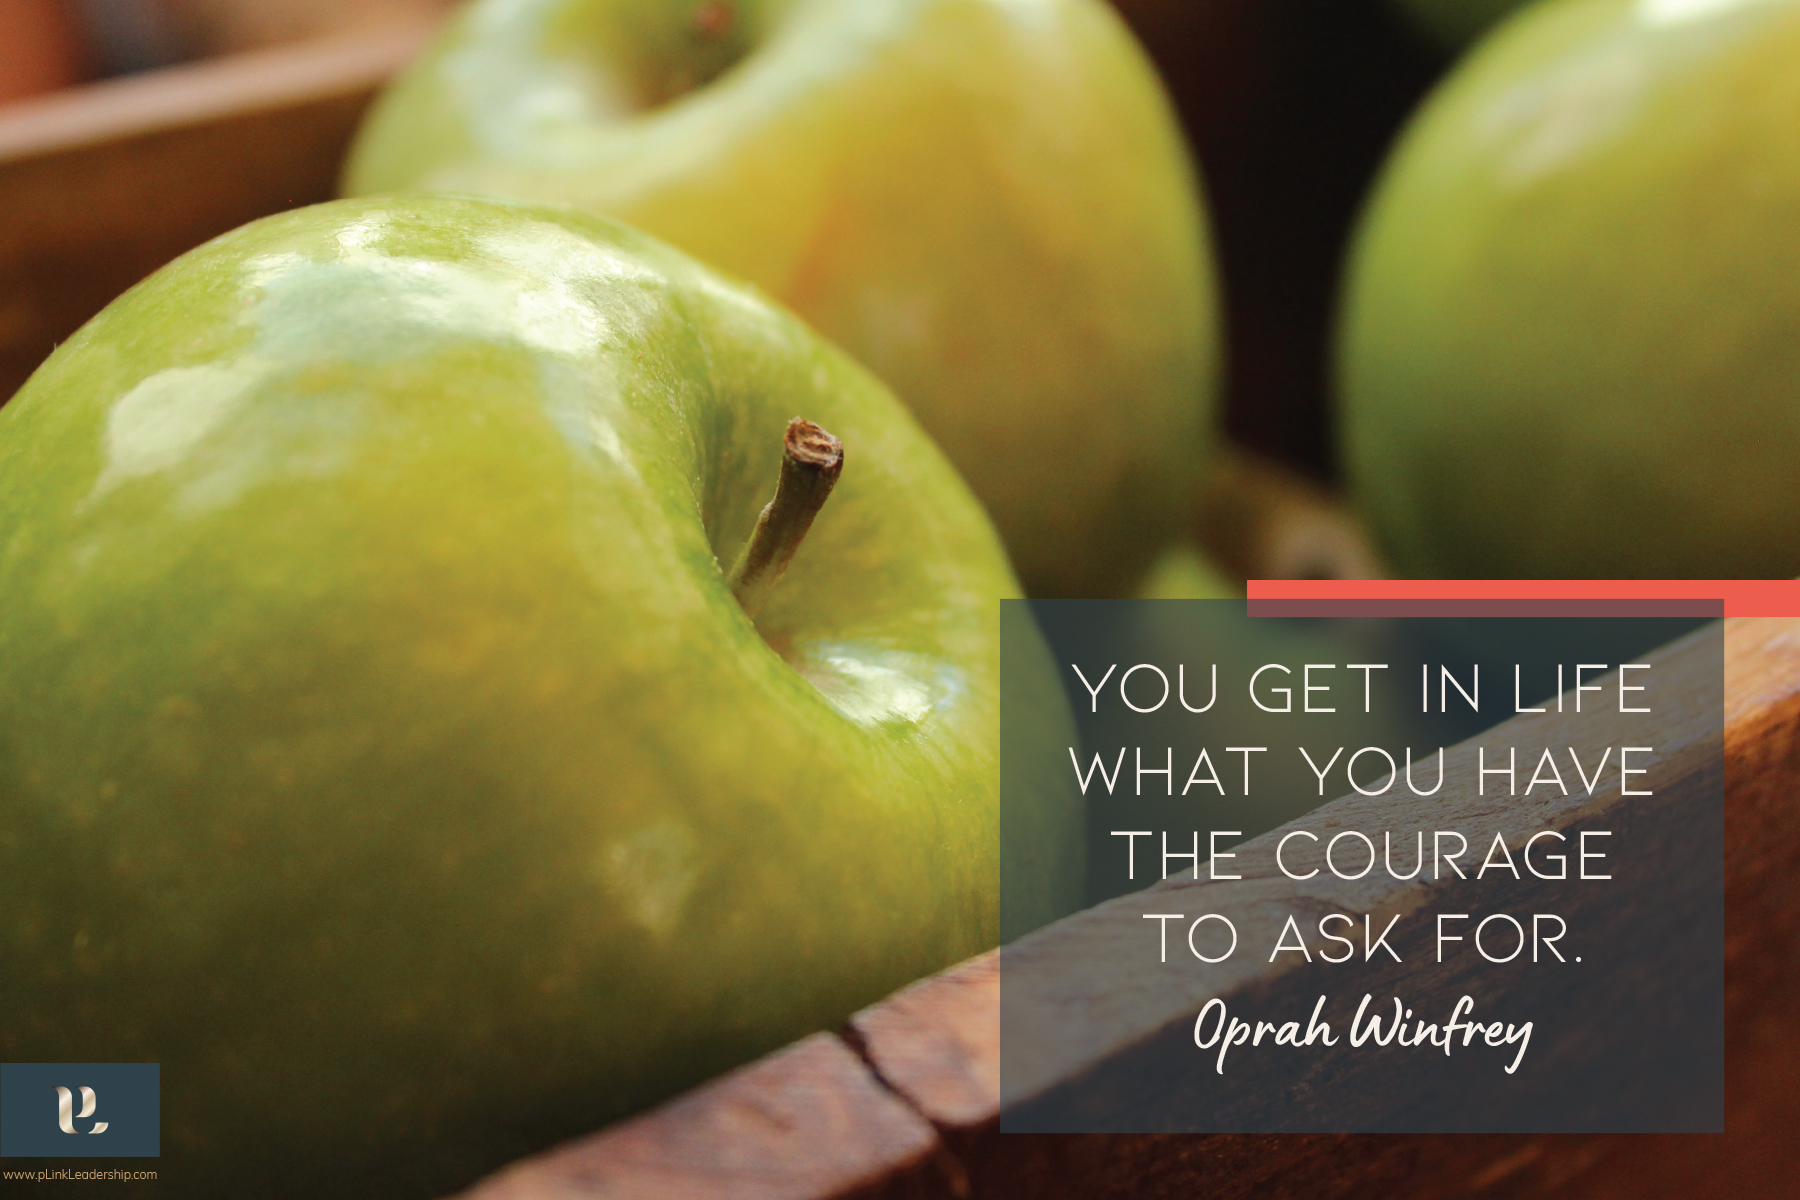 "You get in life what you have the courage to ask for." Oprah Winfrey